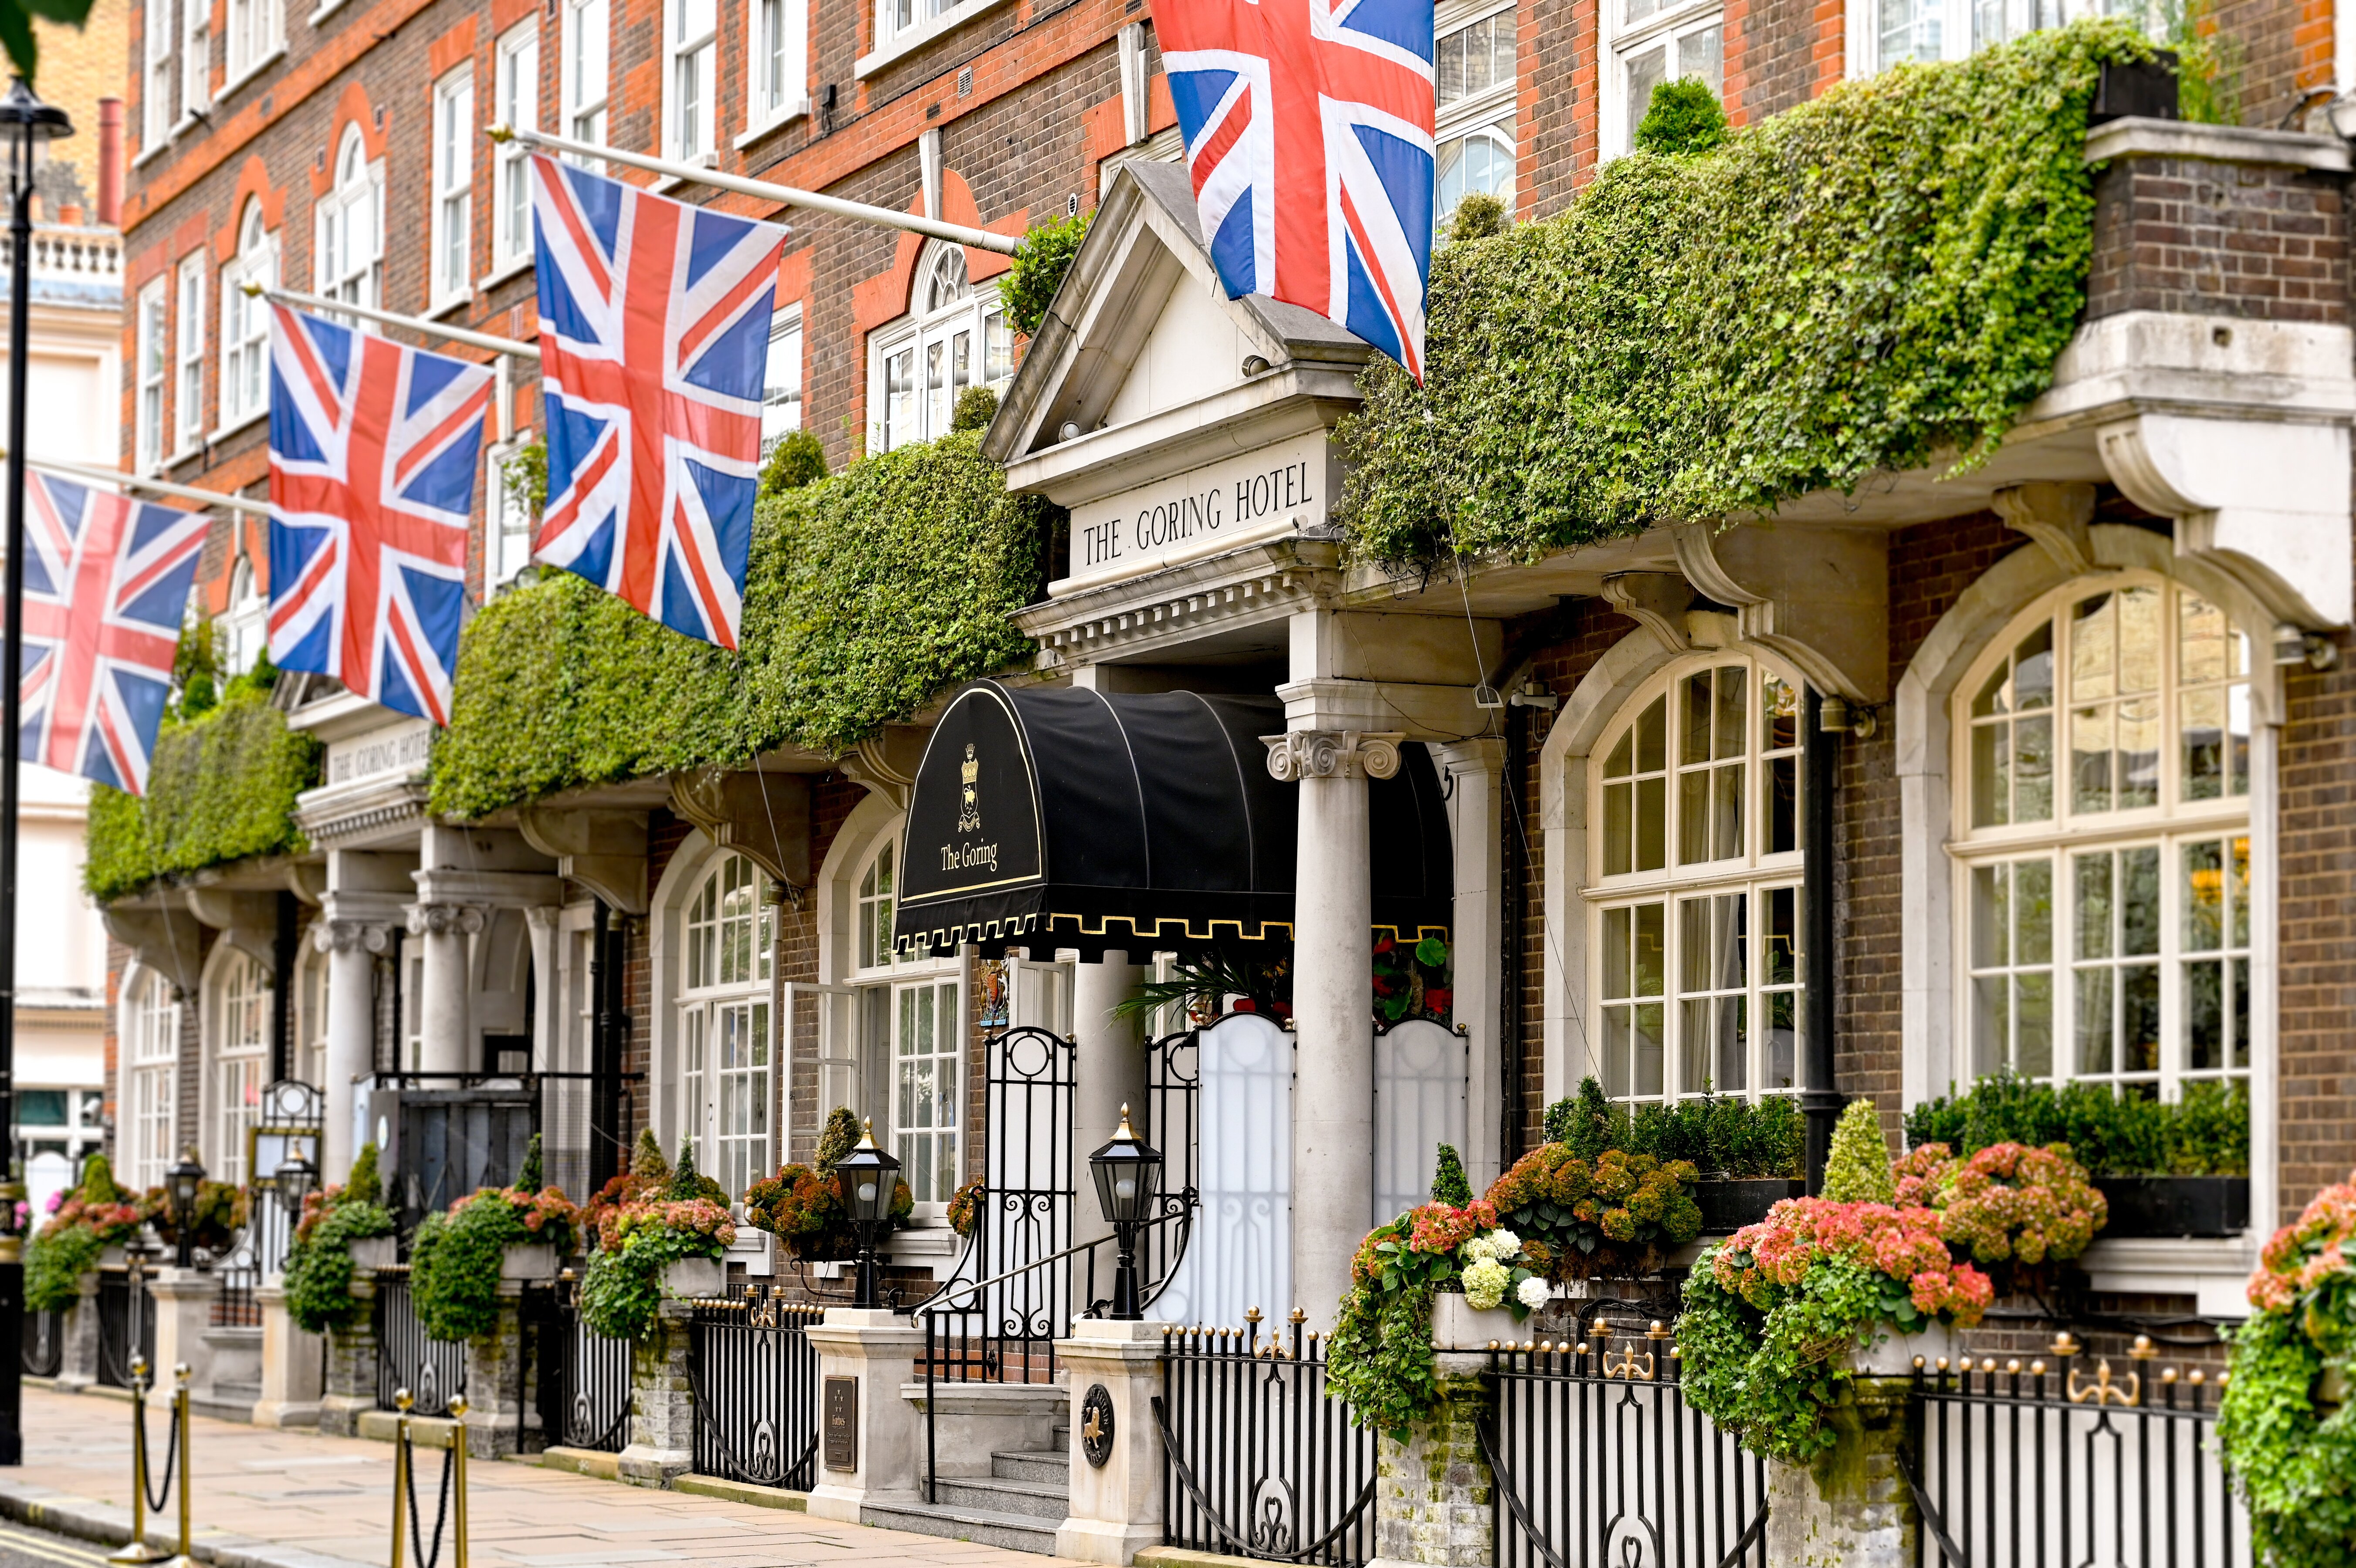 The Goring hotel turns to High Court in battle with neighbour